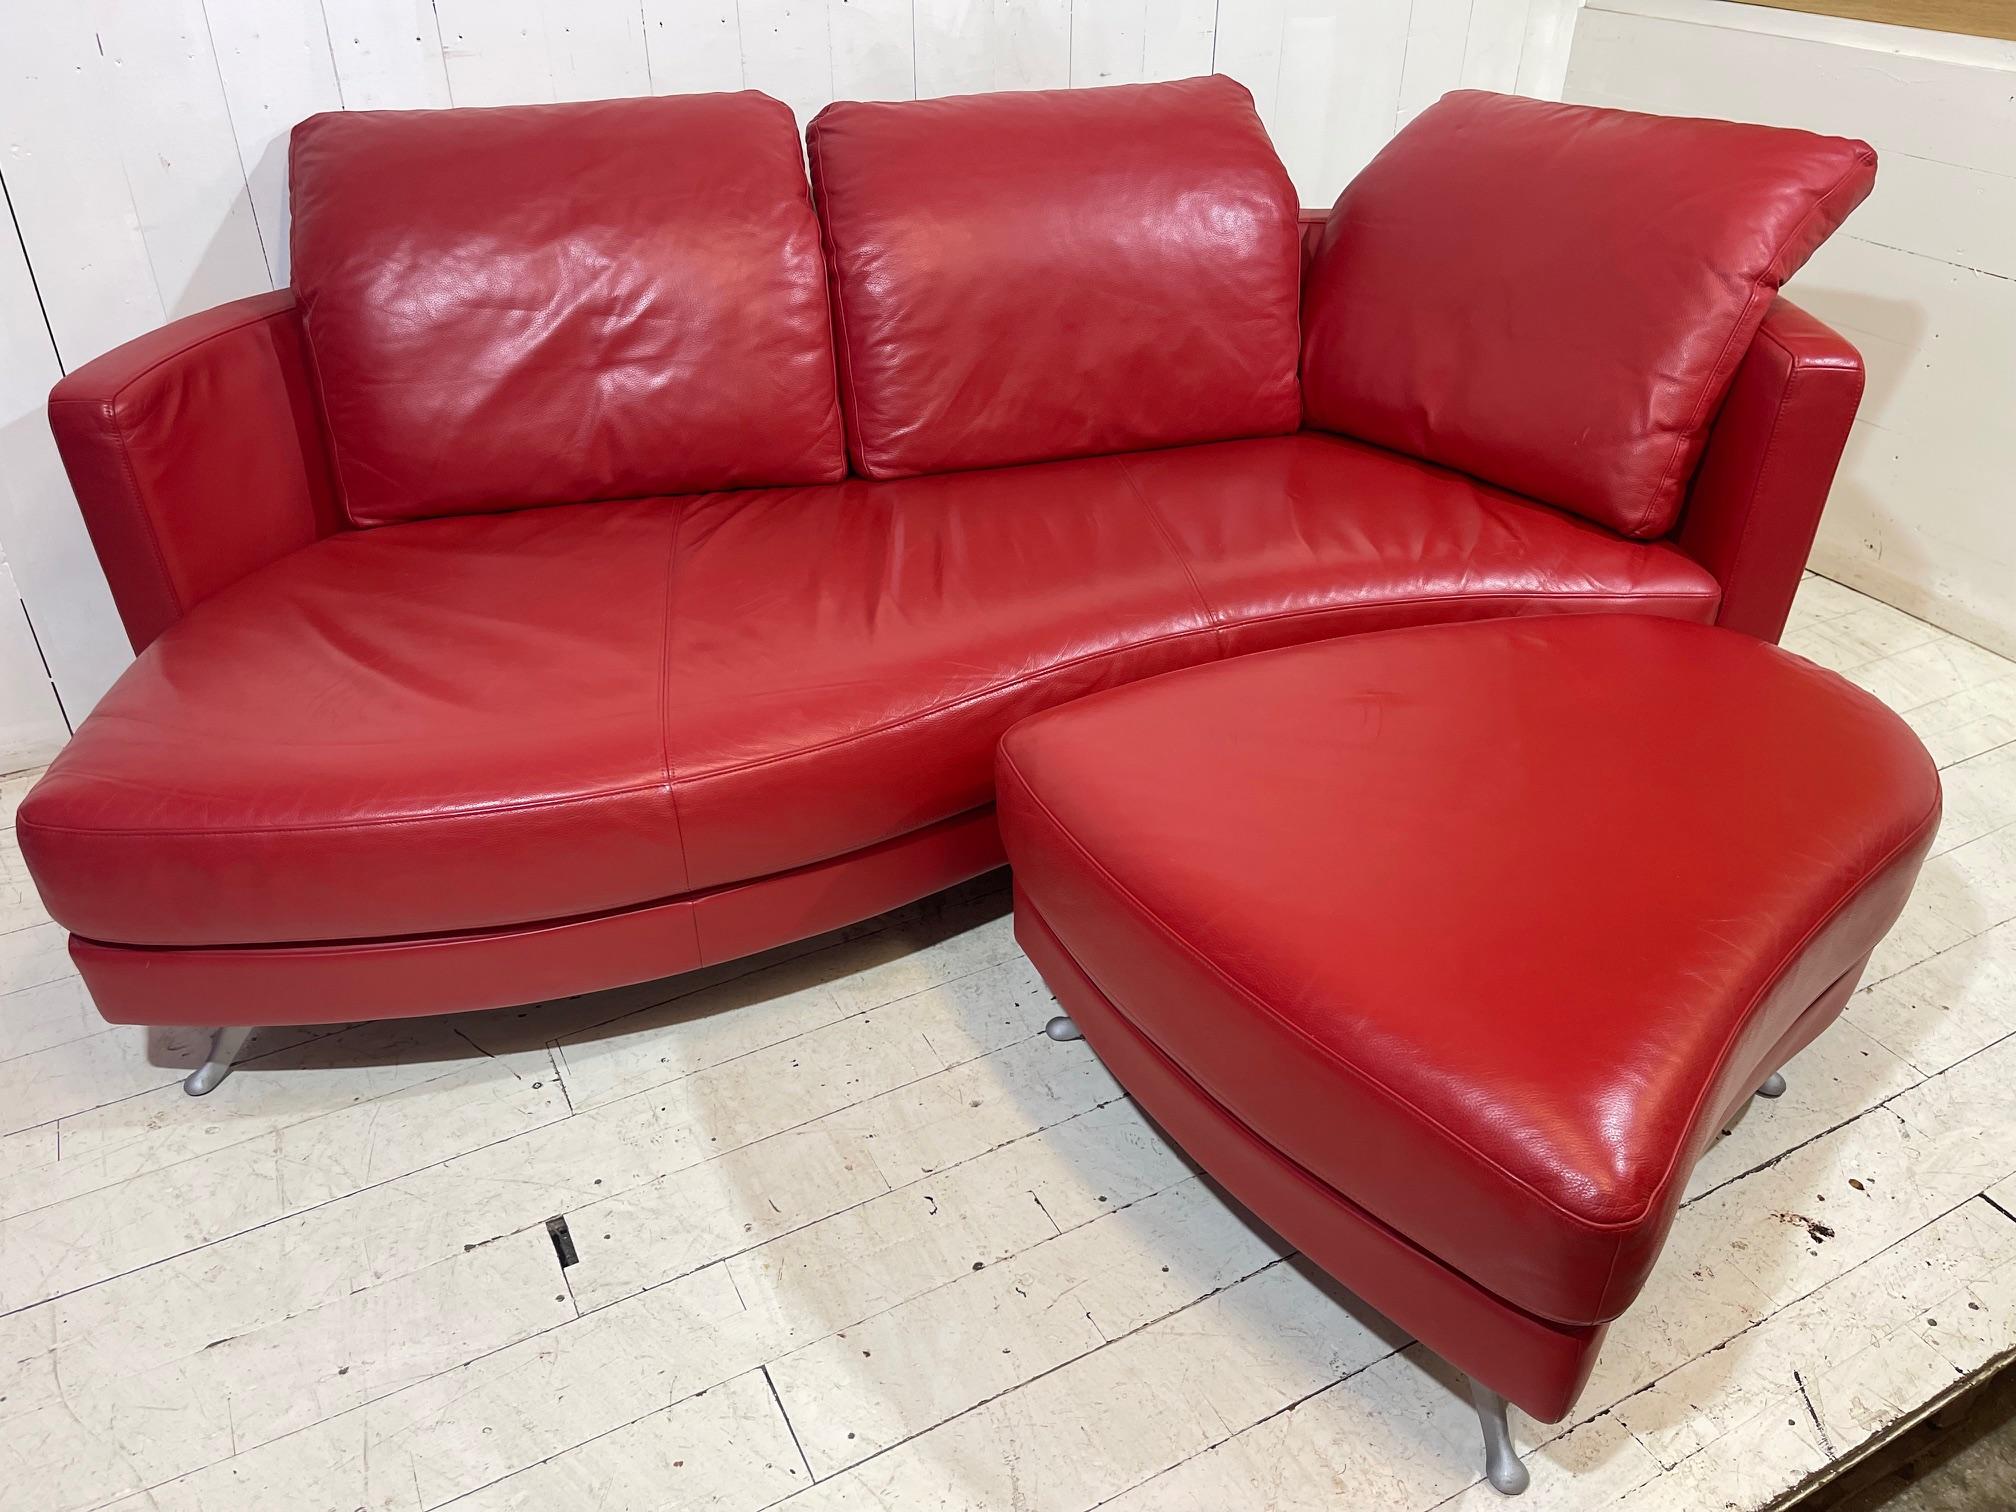 Rolf Benz Sofa and Footstool in Red Leather

Introducing the stunning limited edition Rolf Benz Red Leather Sofa and Footstool, originally a special customer commission from the renowned Rolf Benz brand.

This set is finished in a beautifully